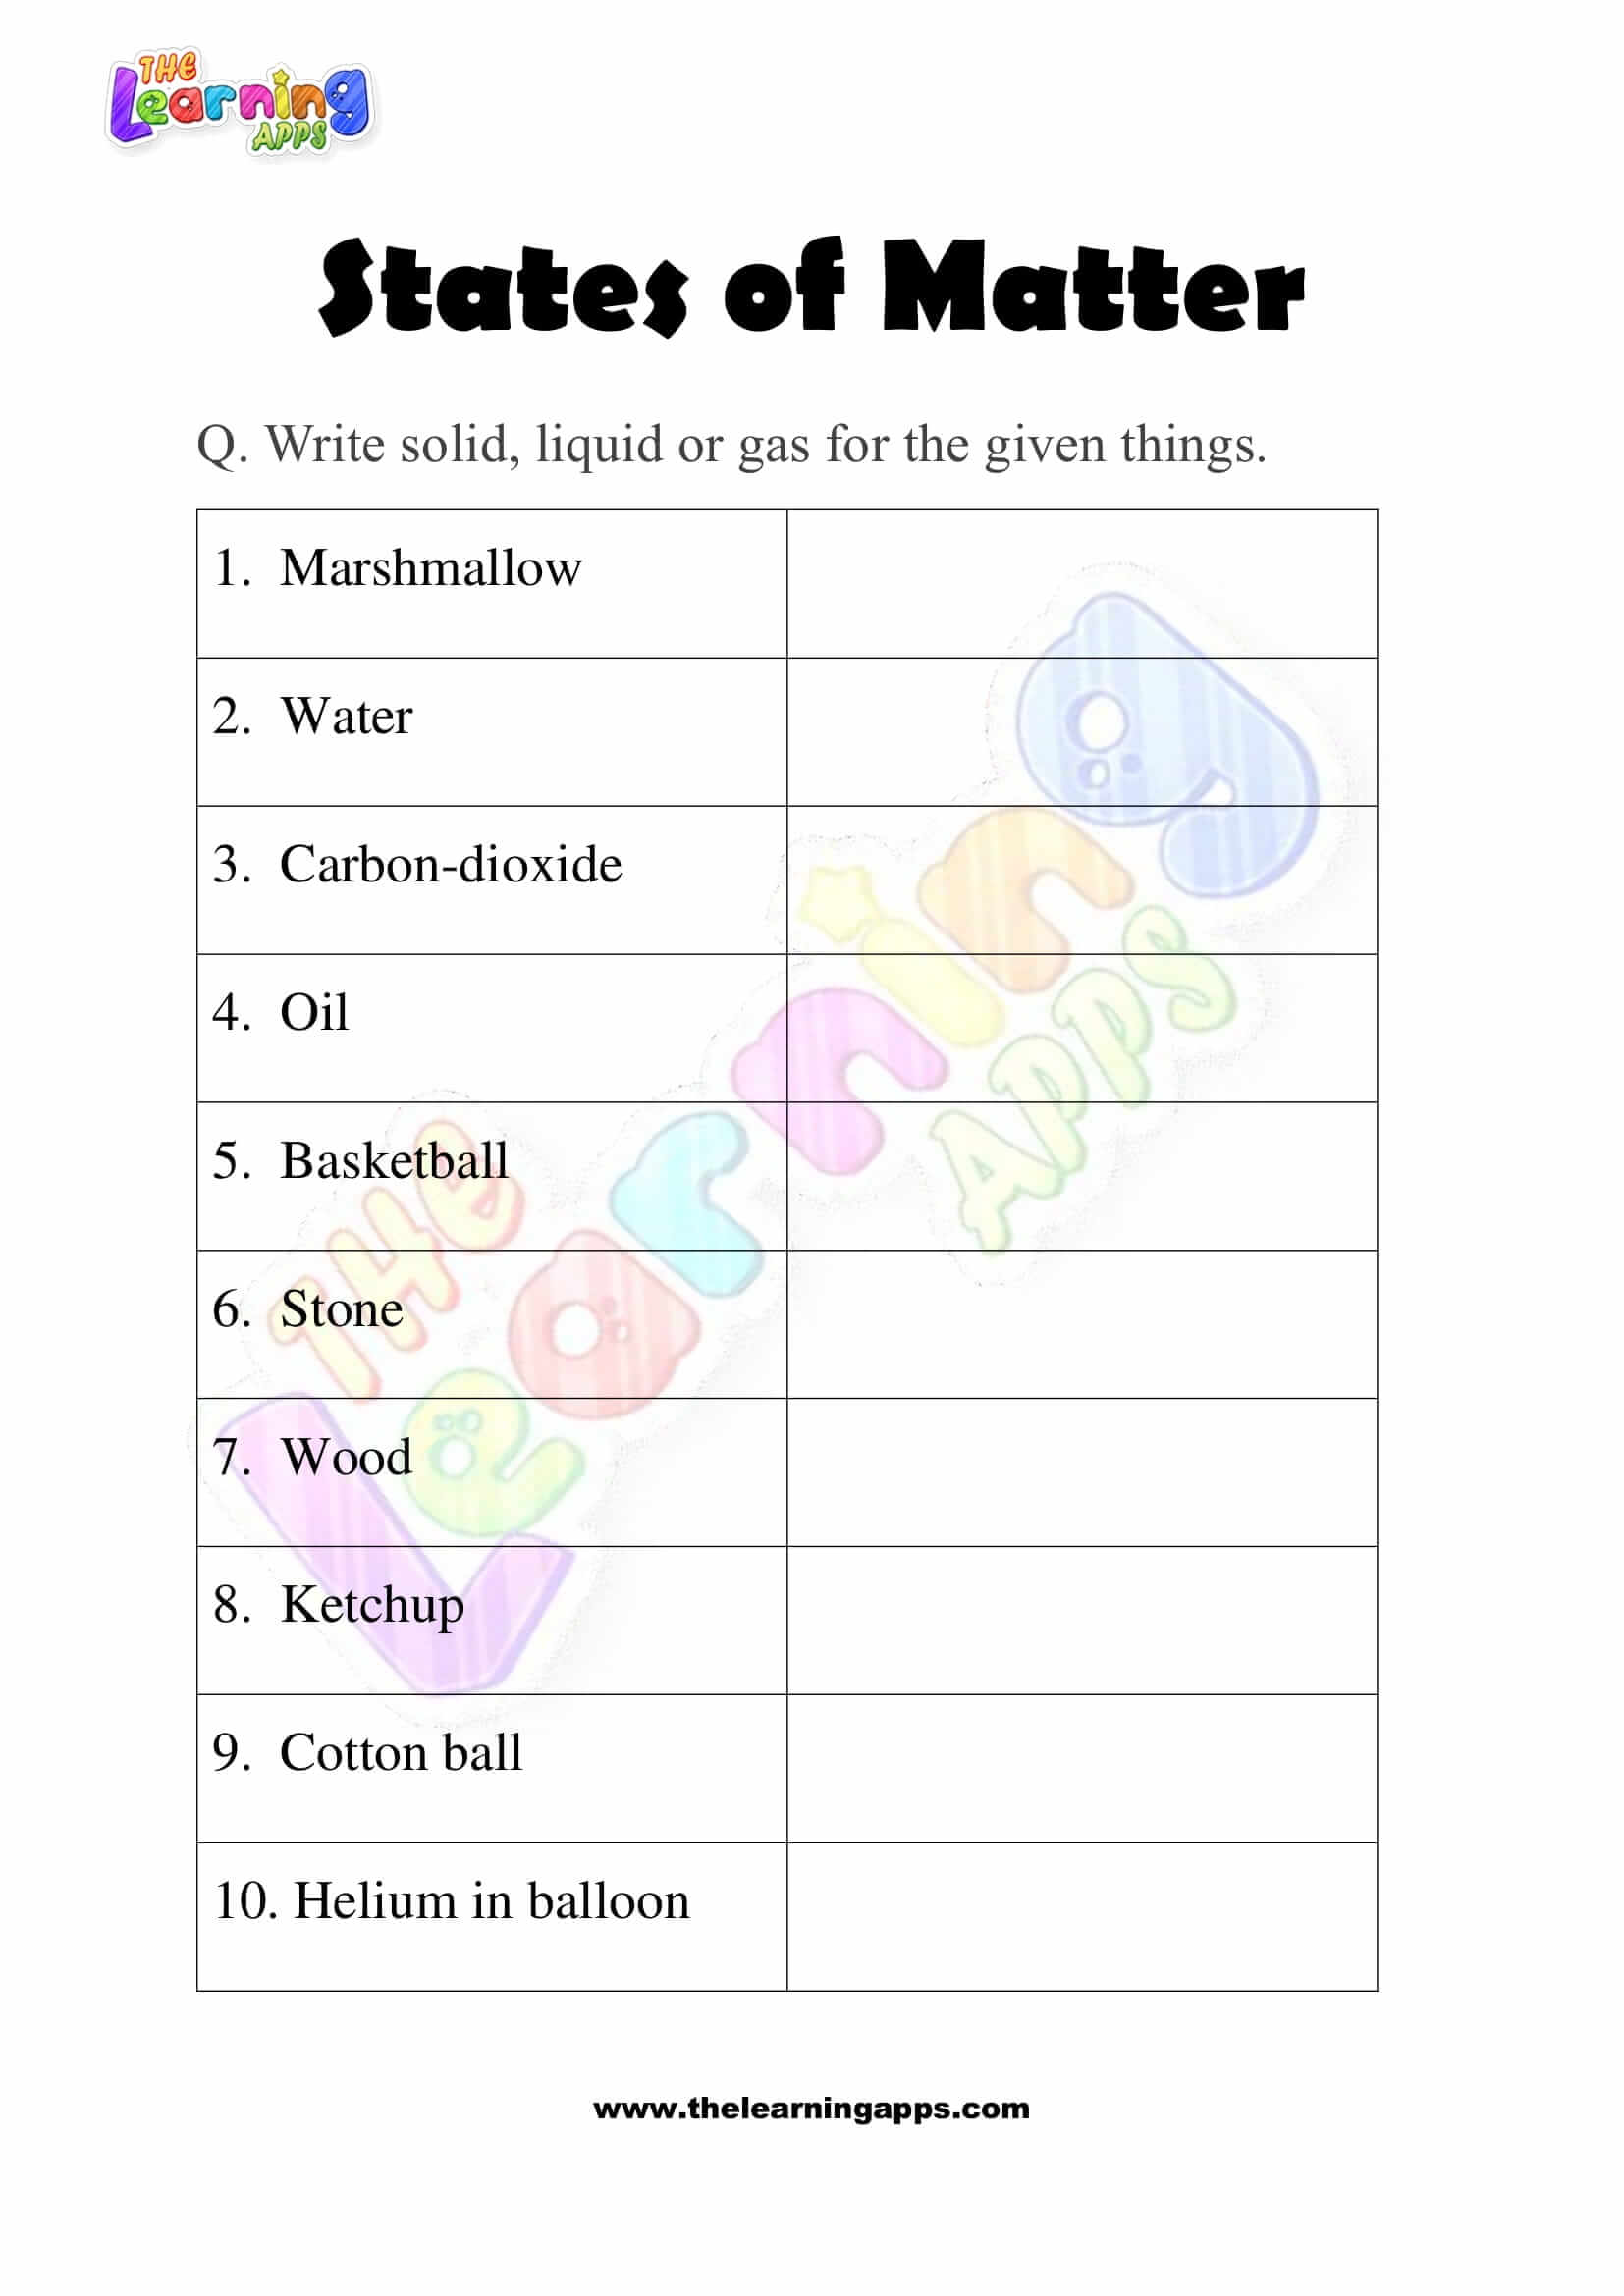 States-of-Matter-Worksheet-for-Grade-Two-Activity-06